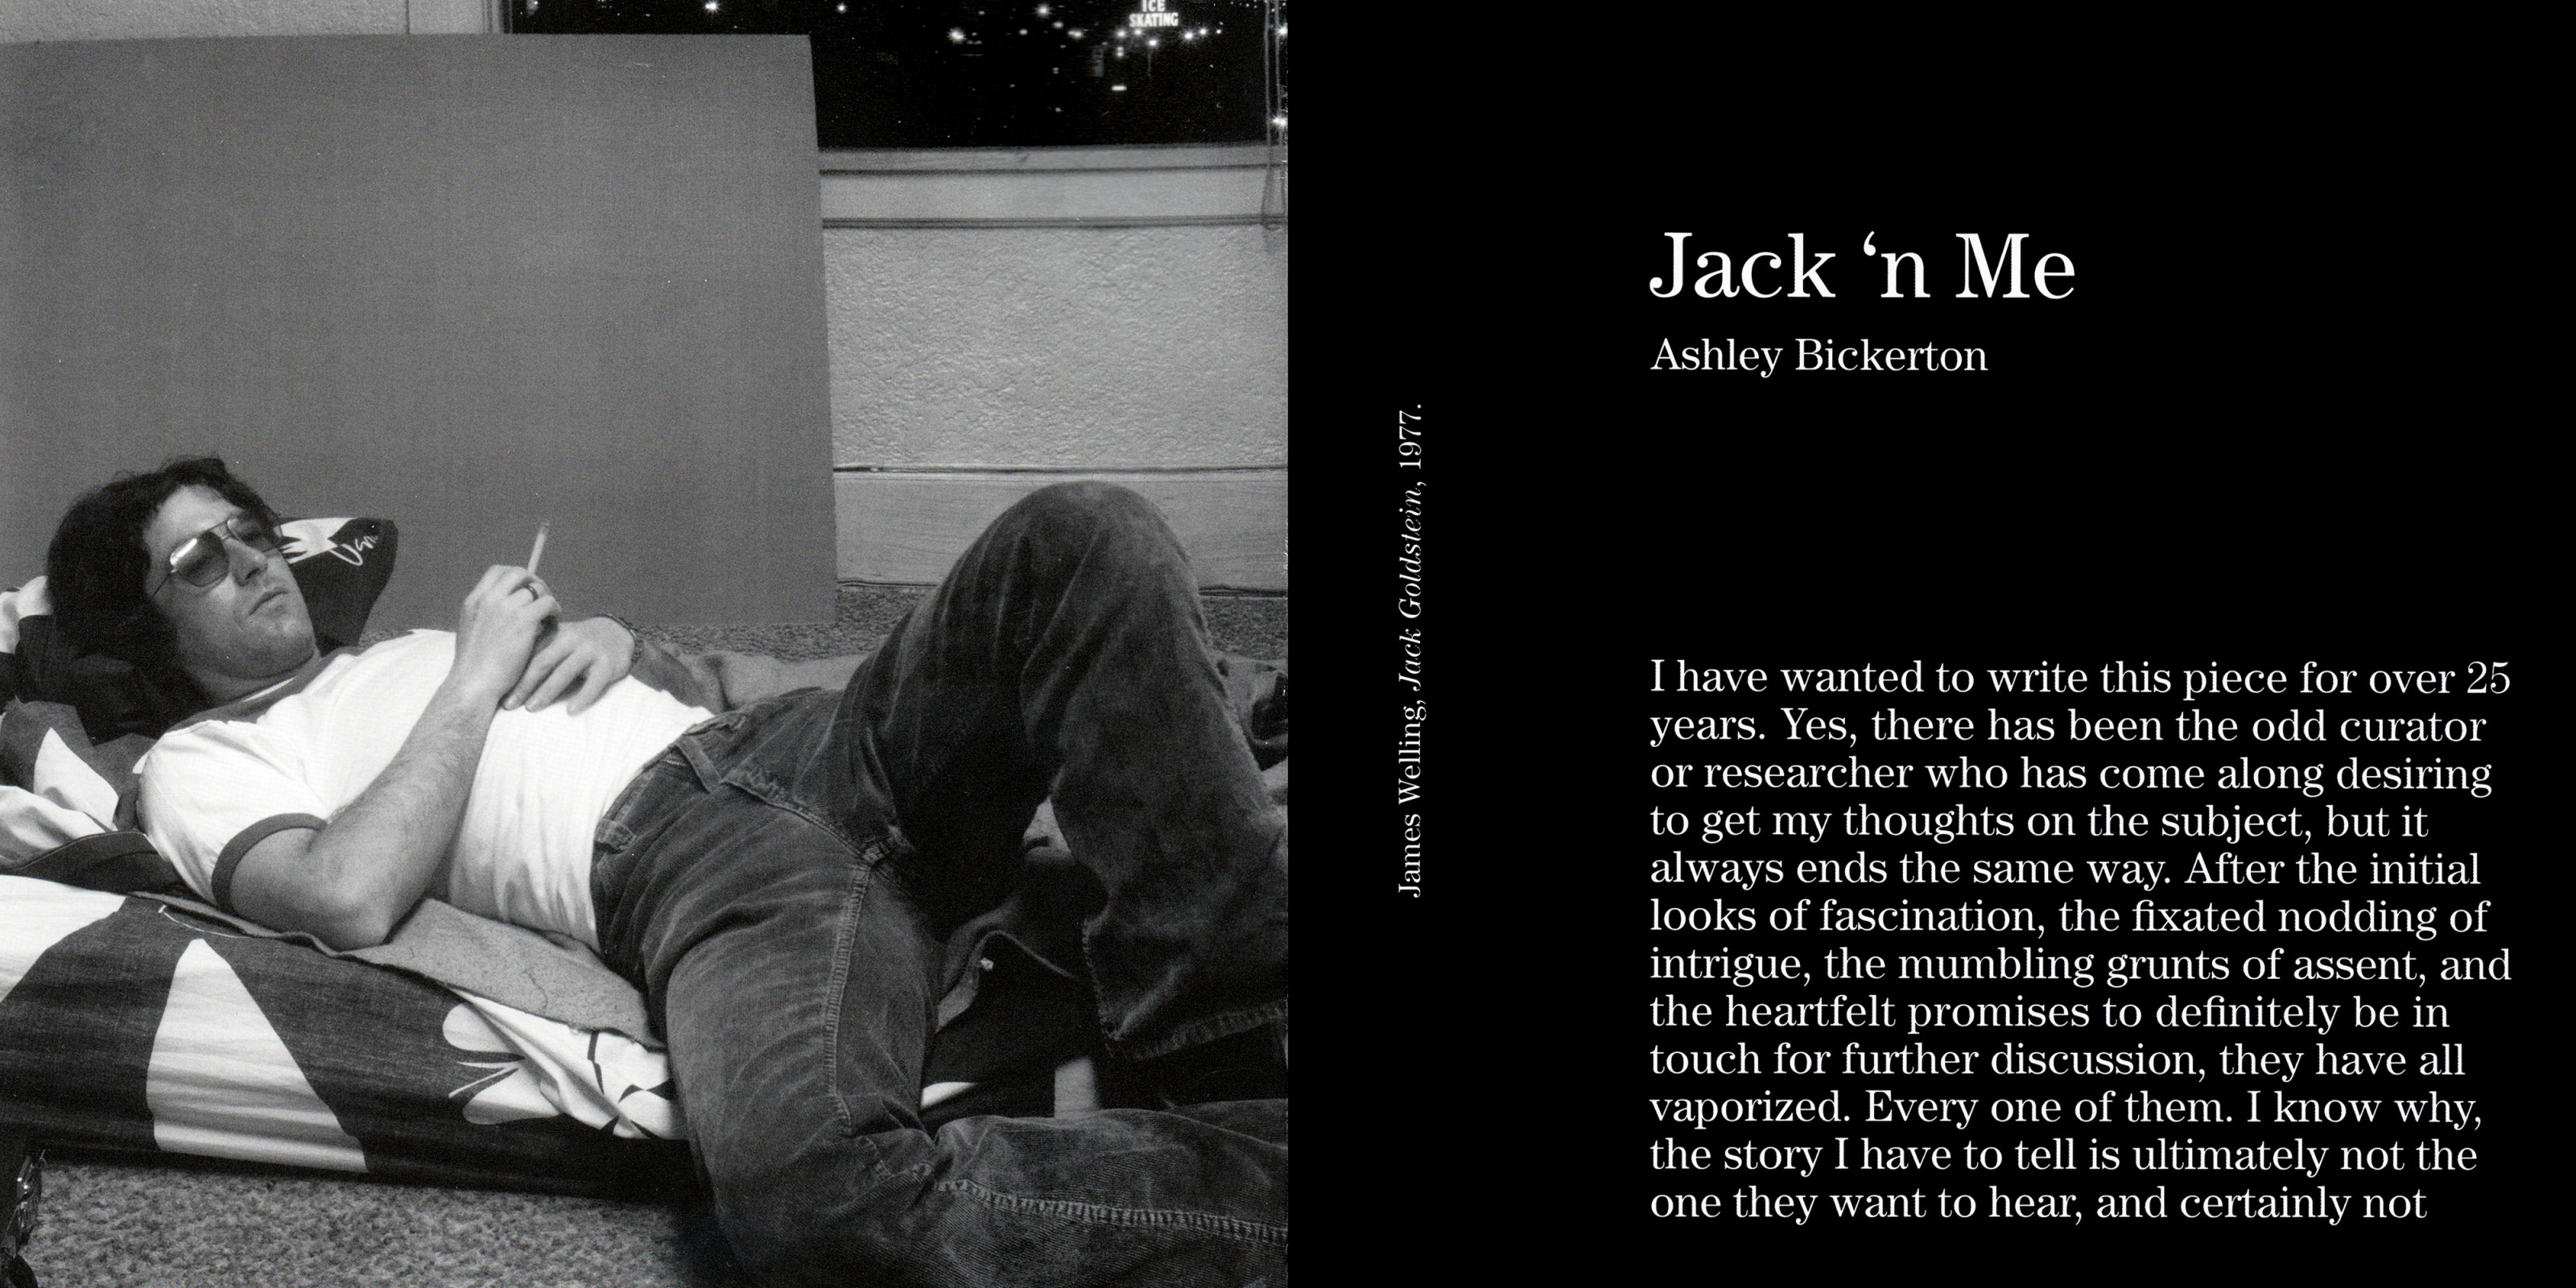 Interior view of Where is Jack Goldstein?, published by Venus Over Manhattan, New York, 2012